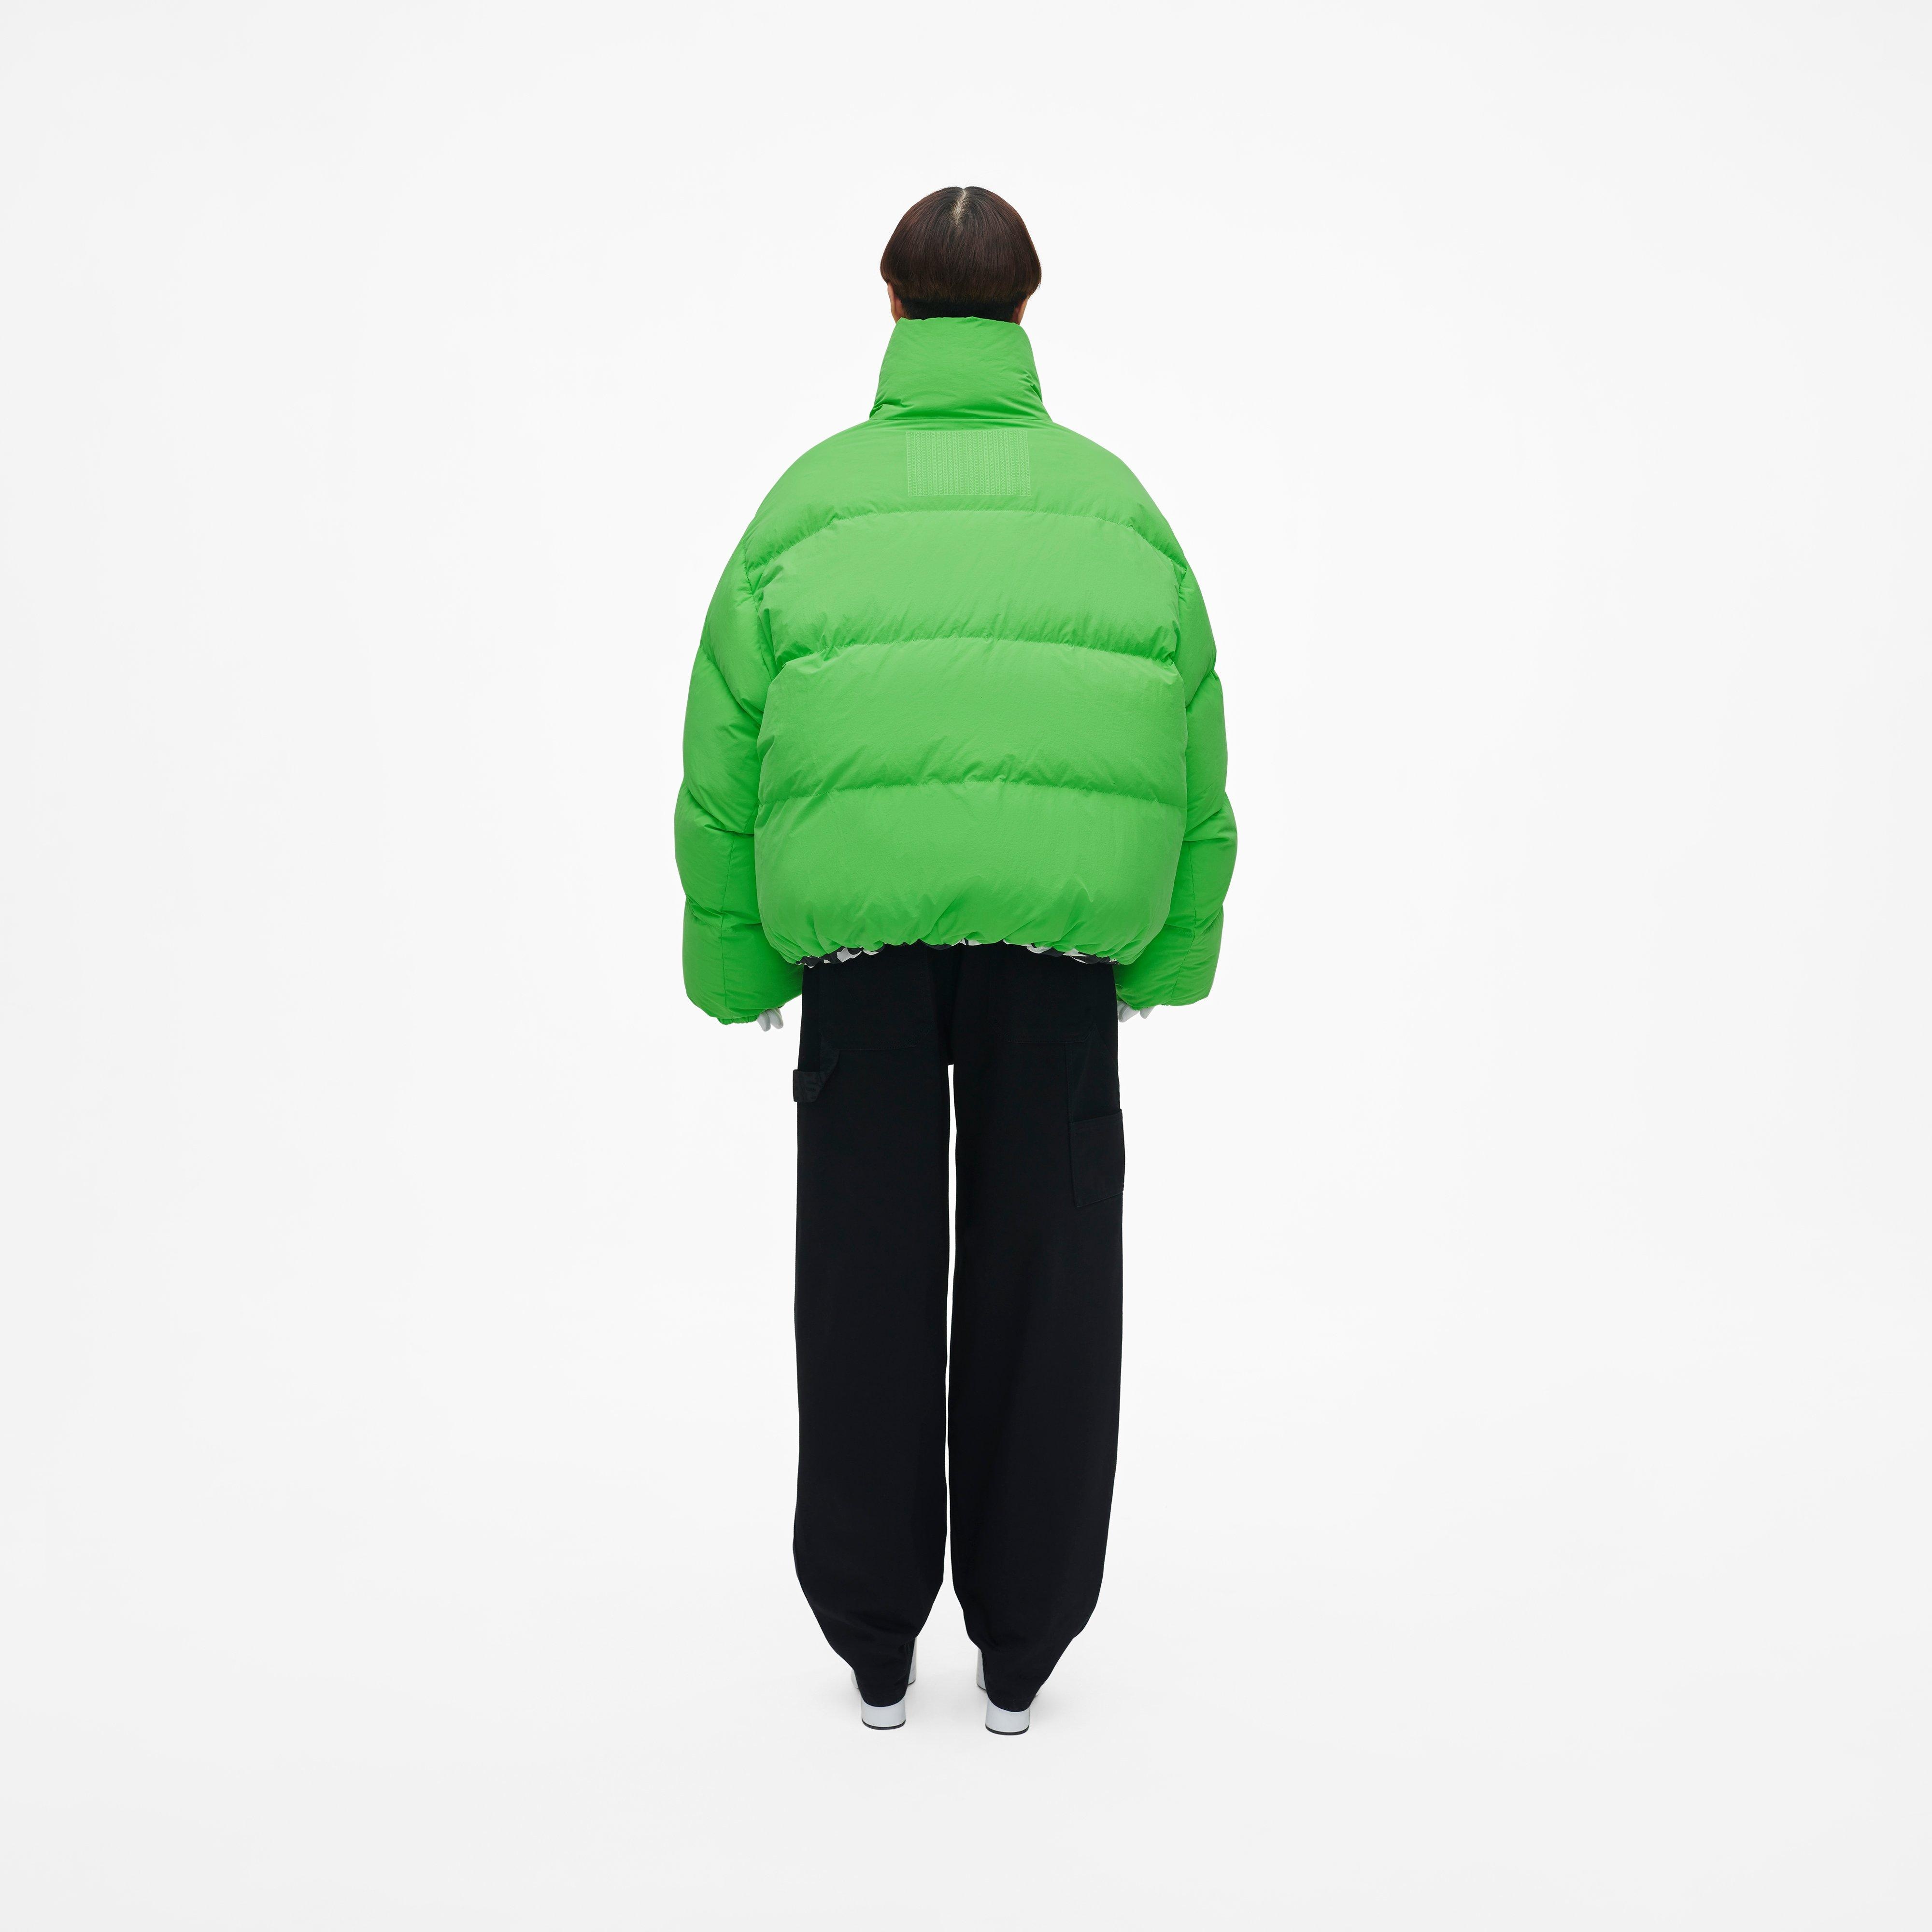 THE REVERSIBLE PUFFER - 4